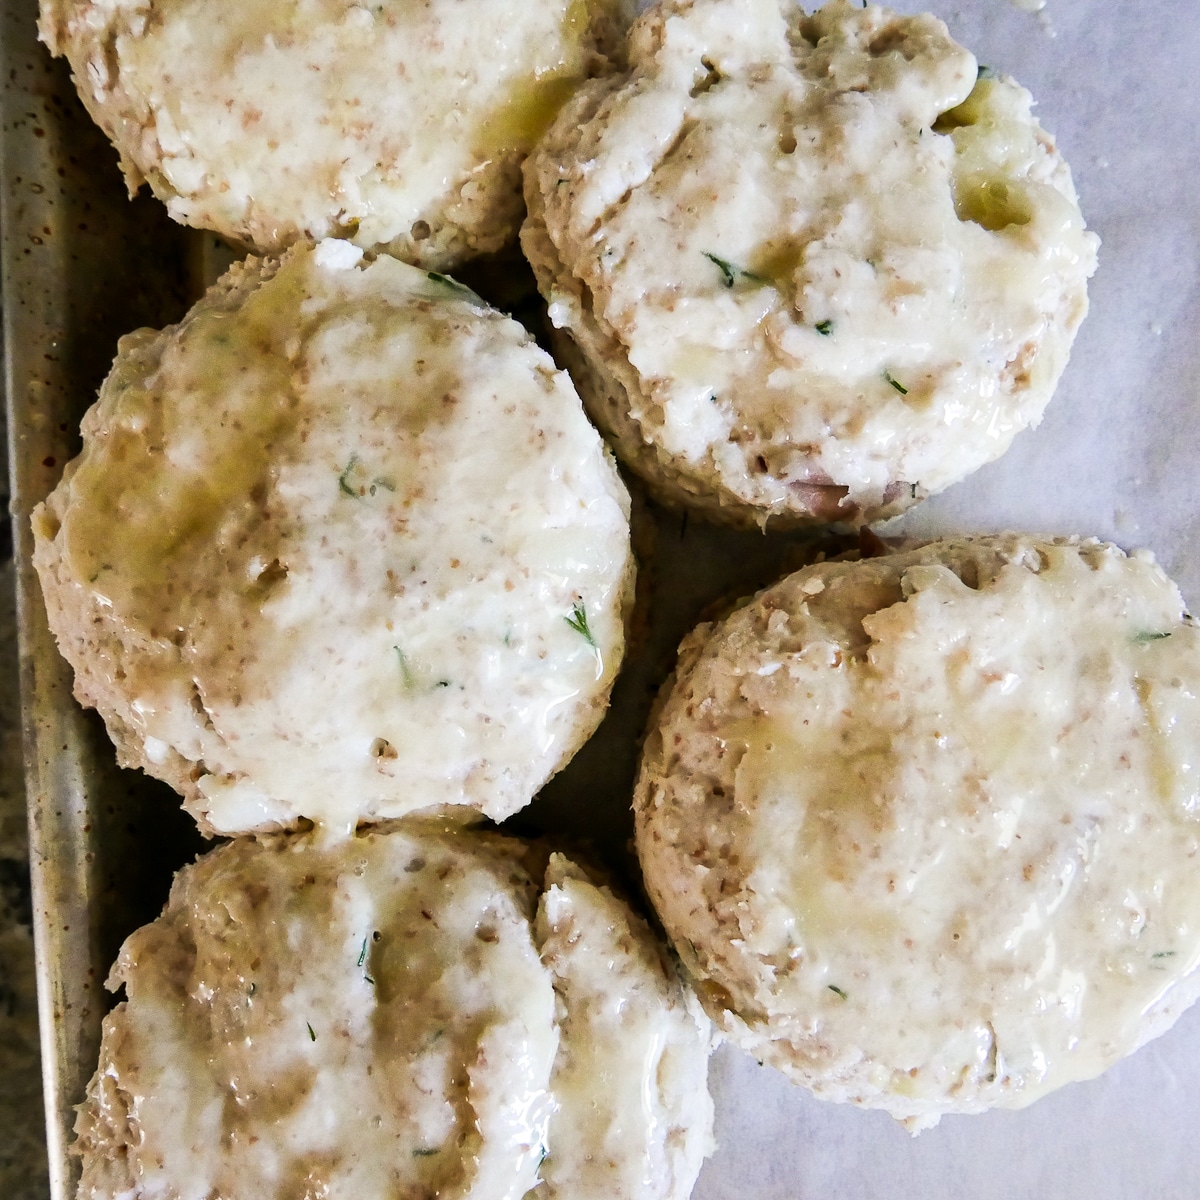 buttered dill biscuits on parchment paper.